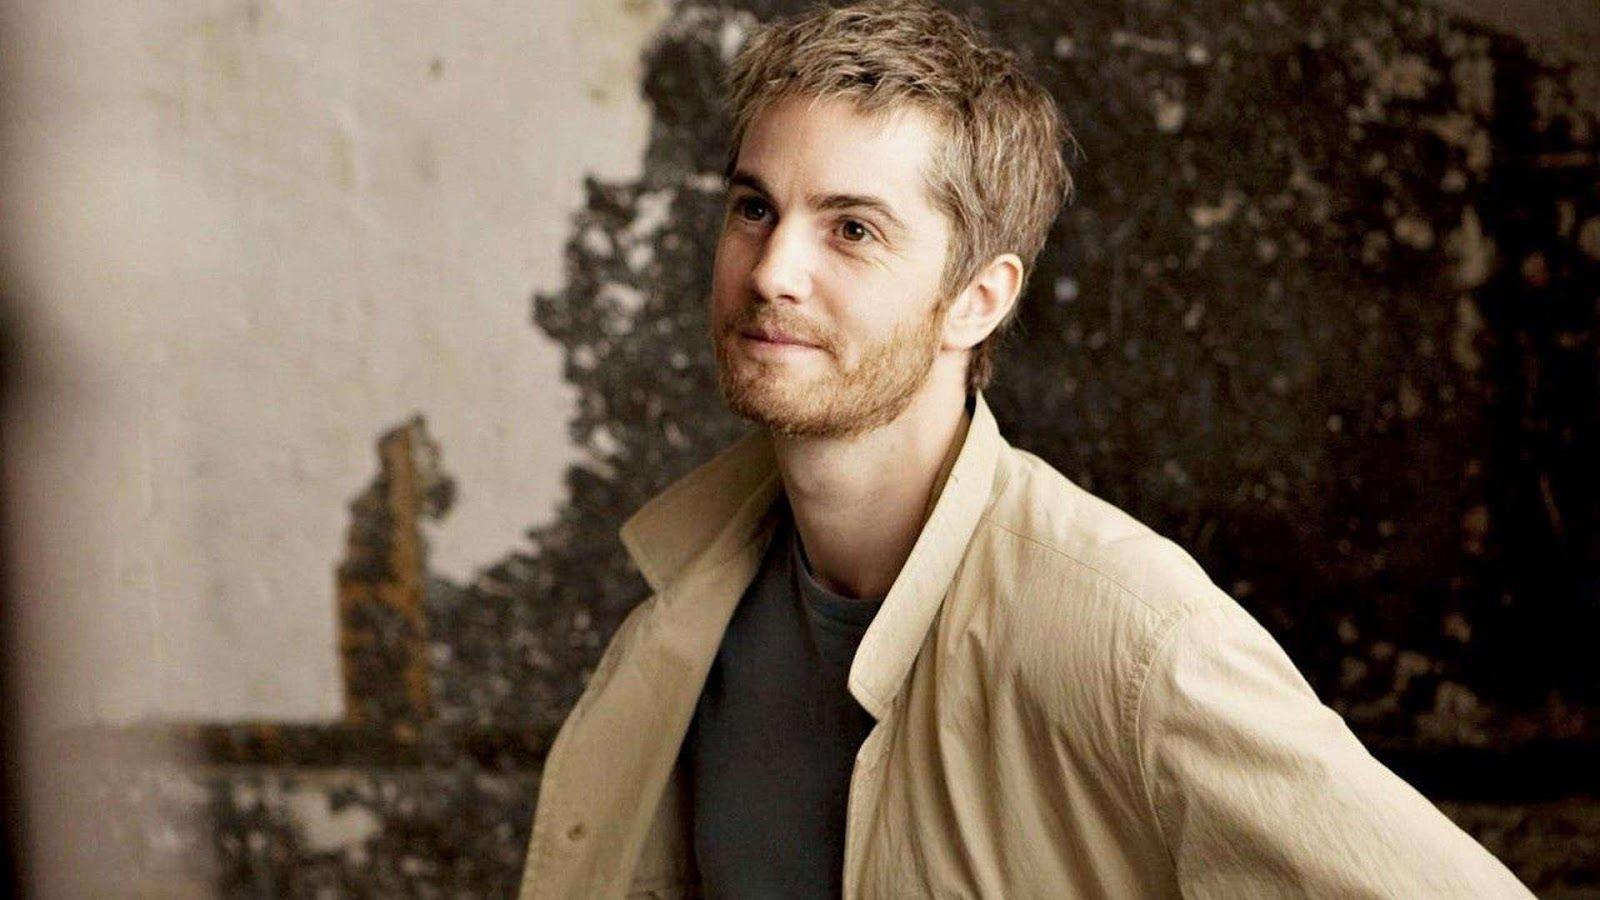 Jim Sturgess All Upcoming Movies List 2017 With Release